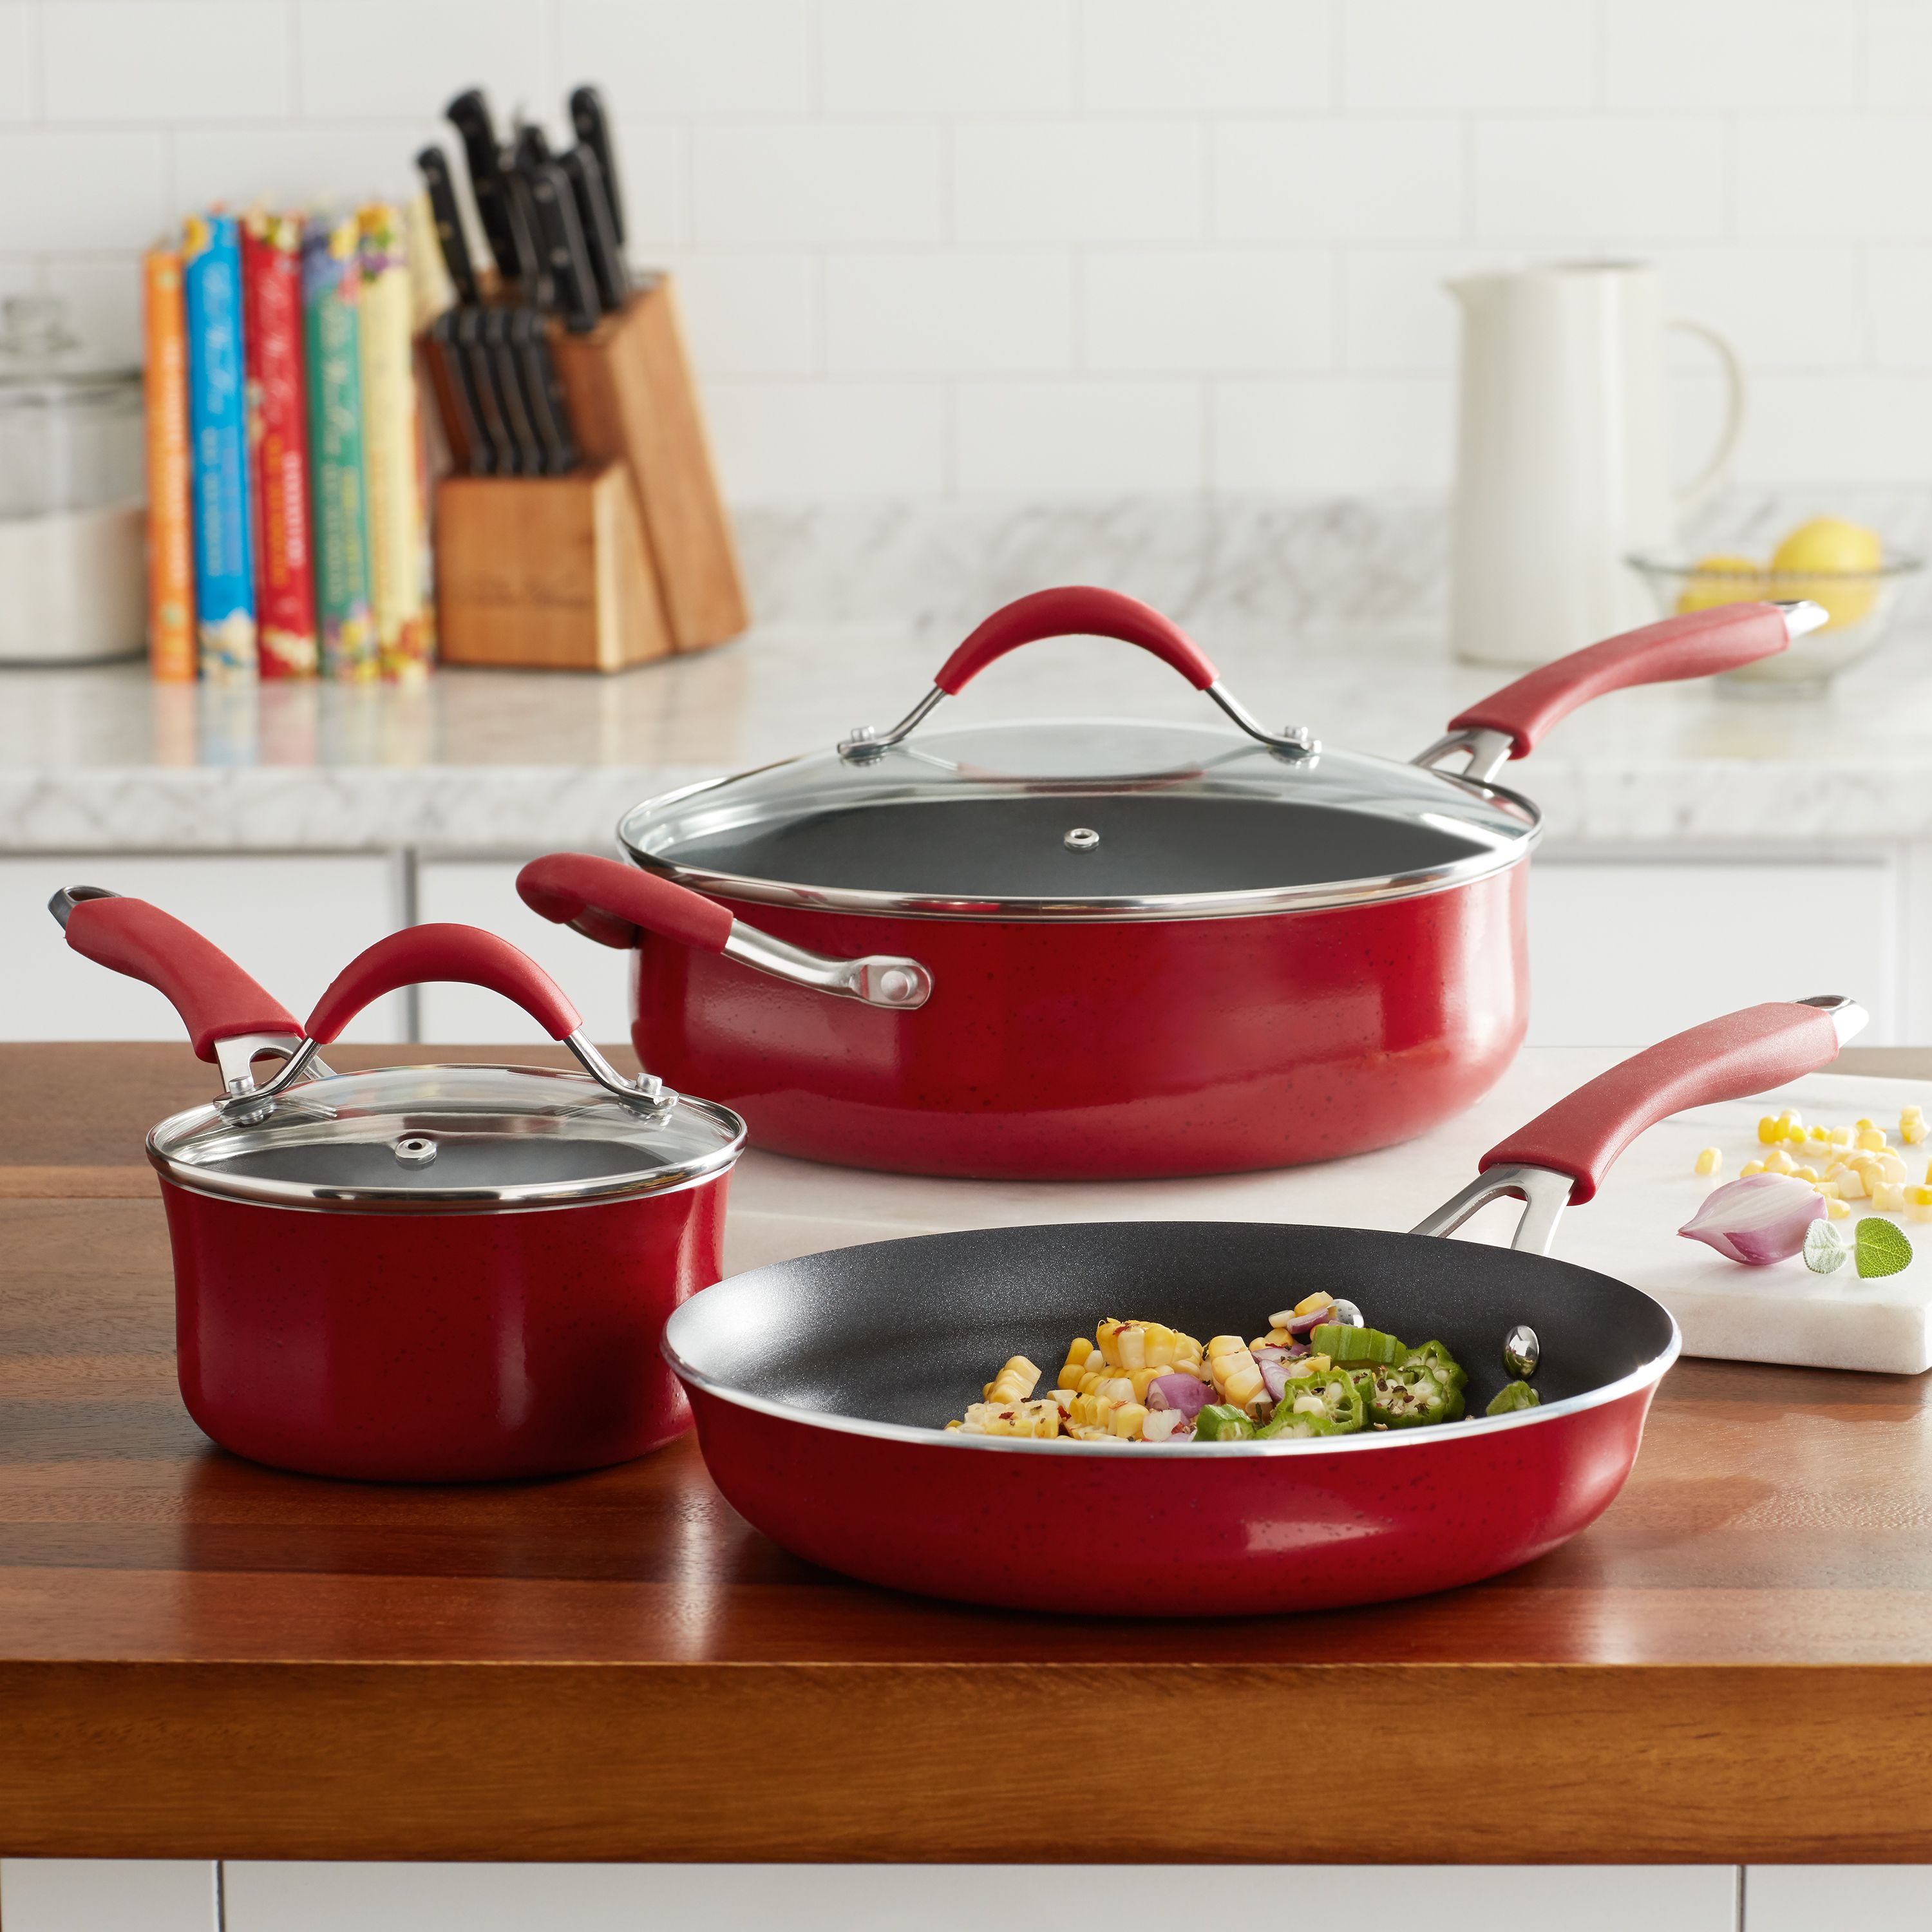 The Pioneer Woman Frontier 5-Piece Non-Stick Aluminum Cookware Set, Red - image 1 of 7